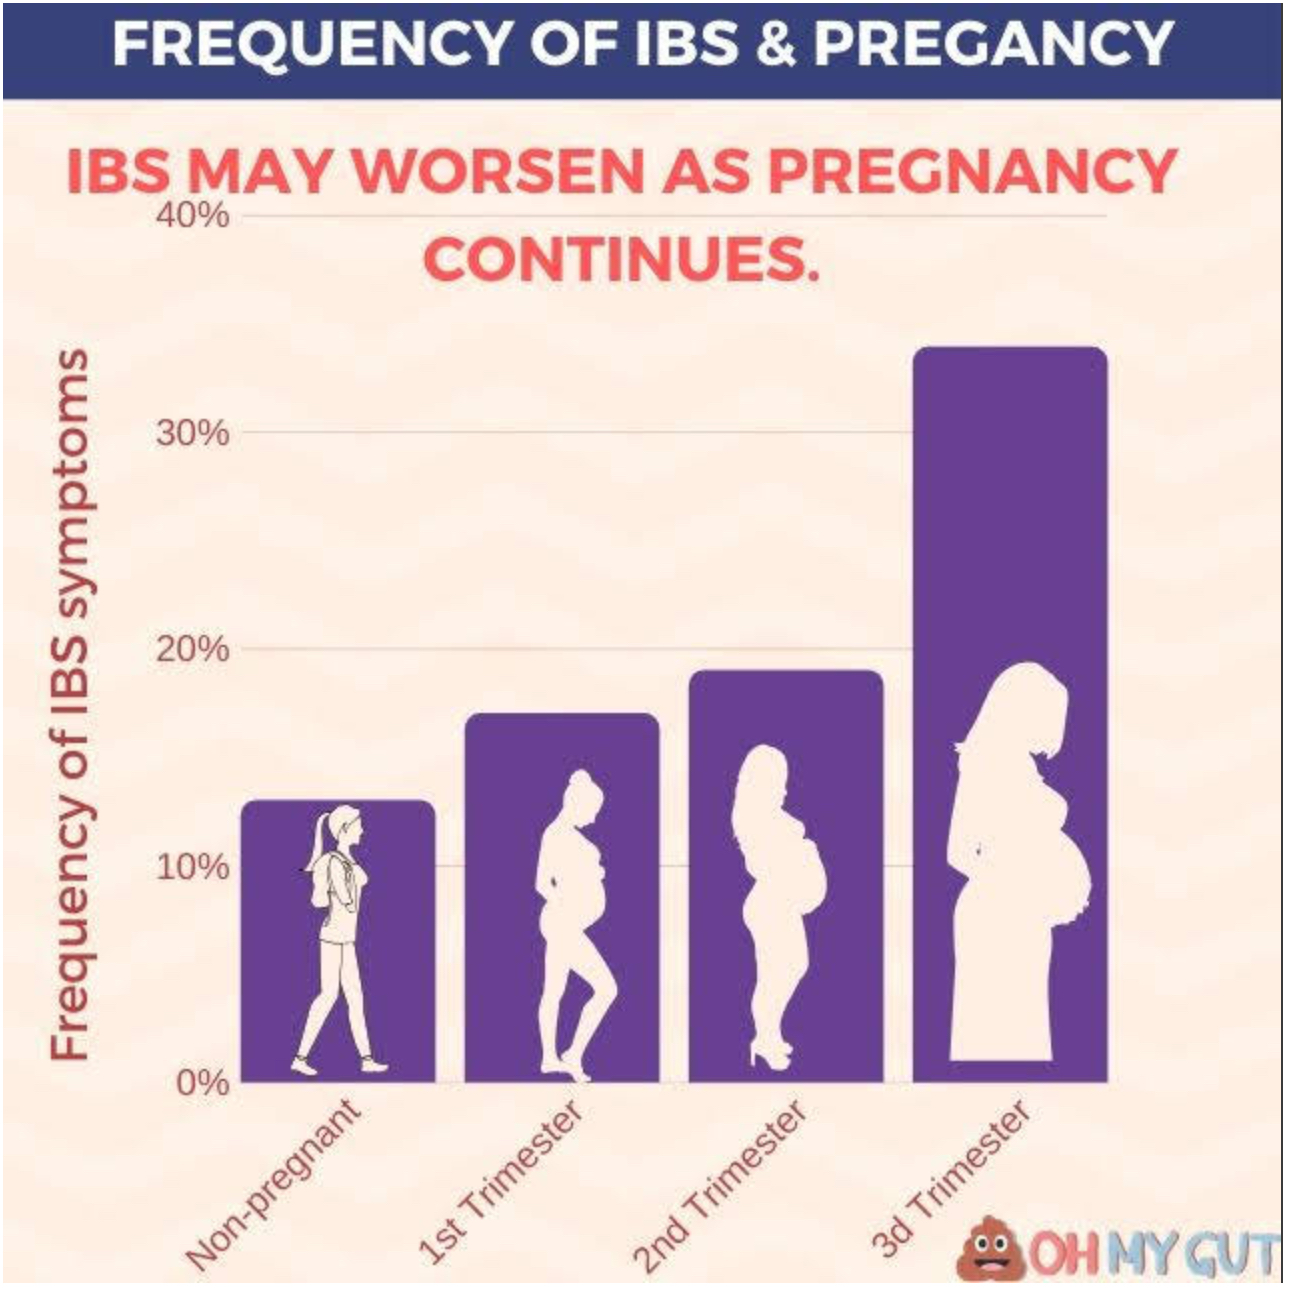 Symptoms of IBS tend to be more common as pregnancy progresses.